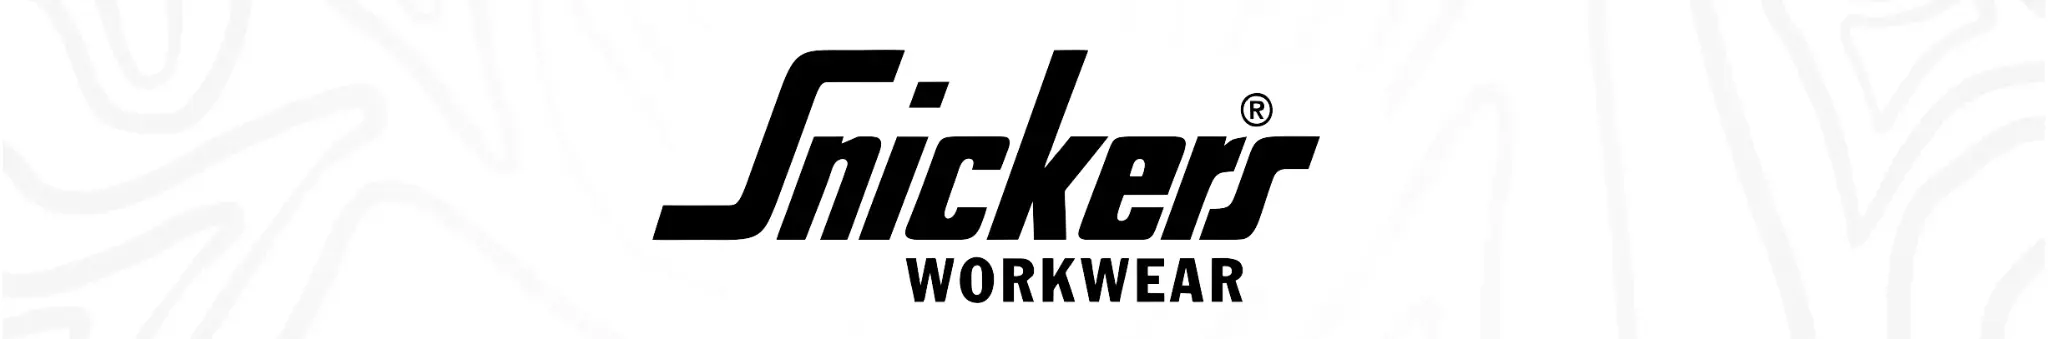 SNICKERS WORKWEAR